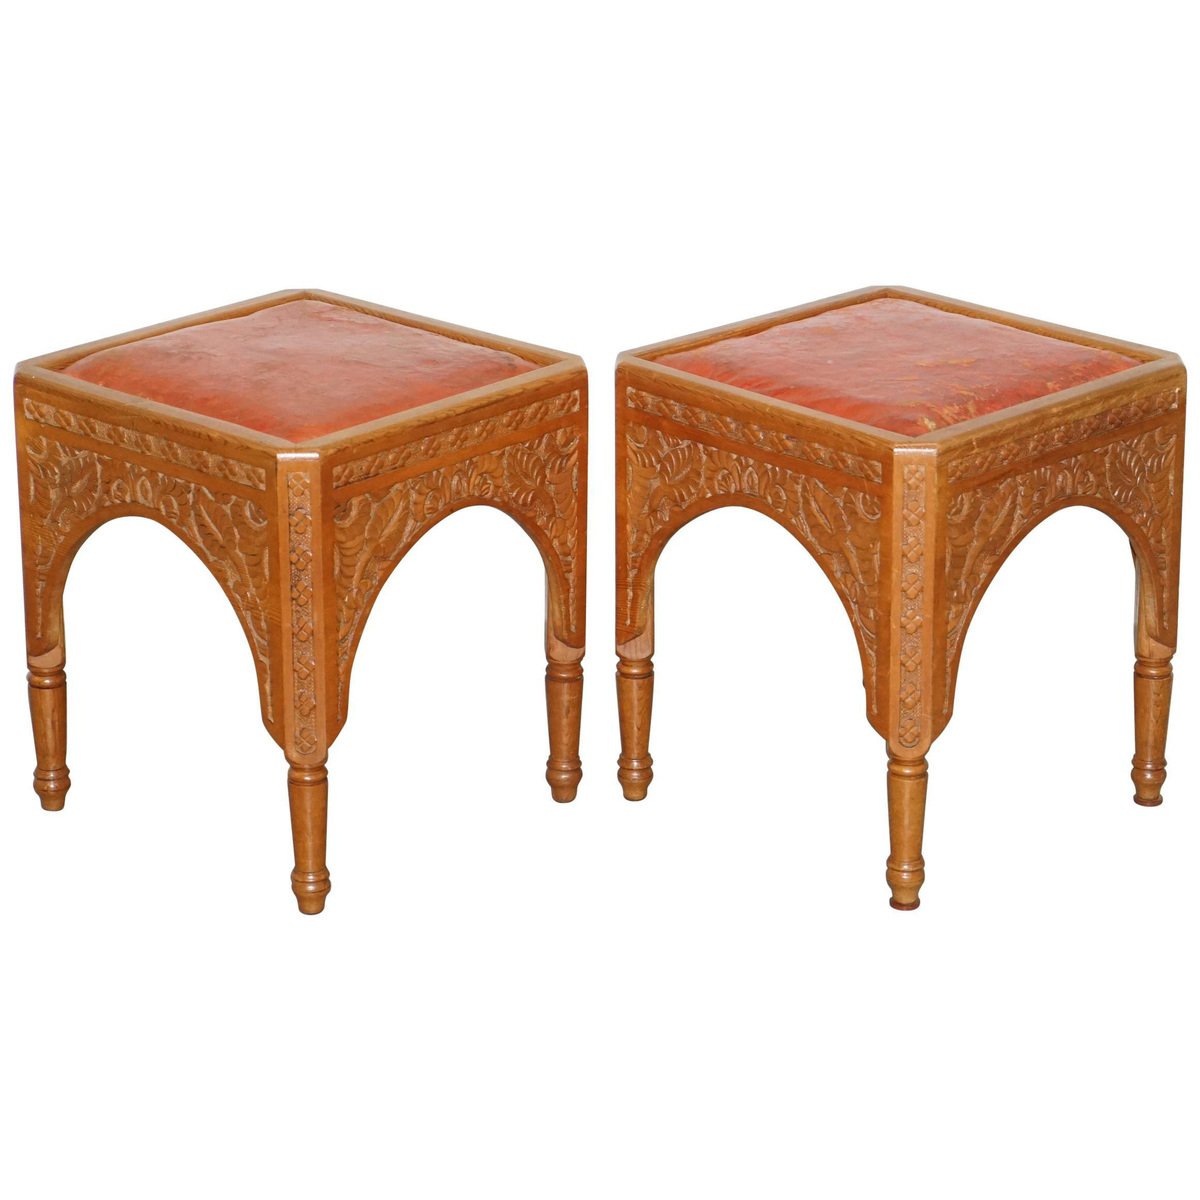 antique victorian hand carved asethetic movement stools 19th century set of 2 GZP-1006800